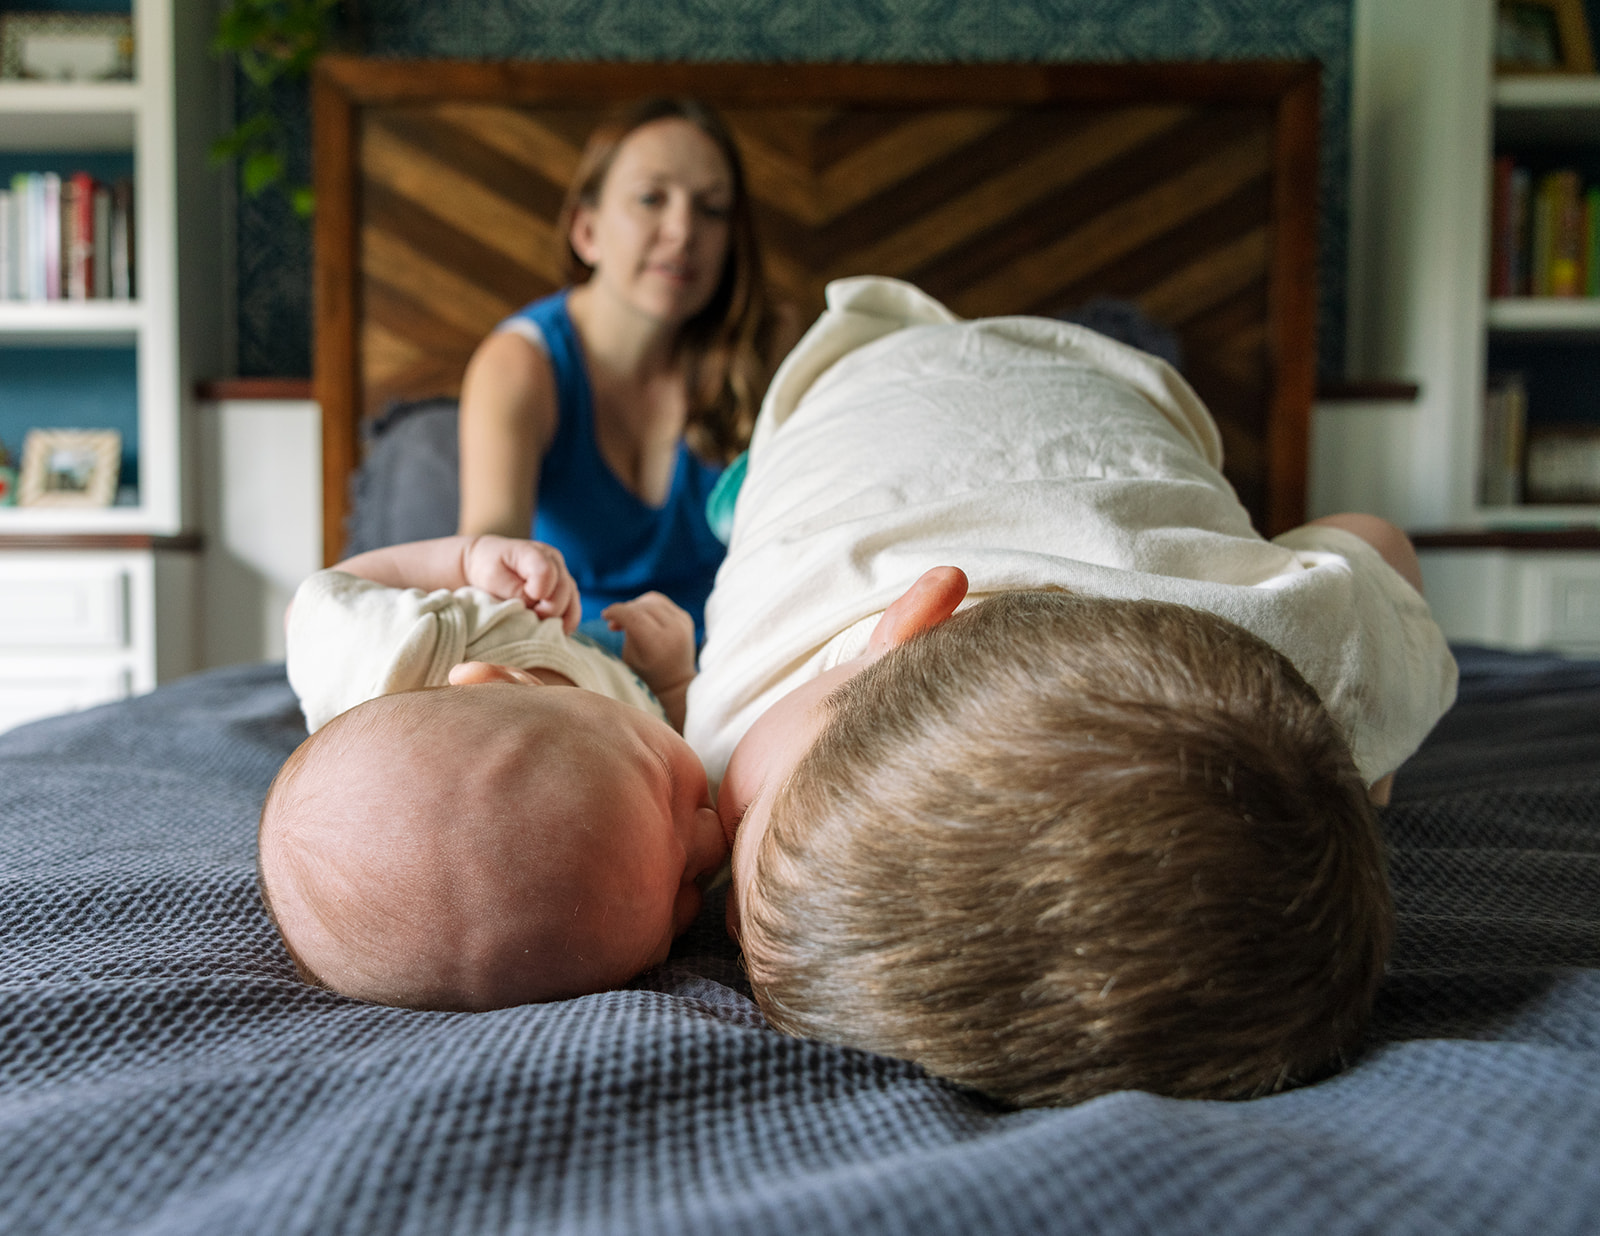 photo of the toddler boy and newborn brother in child's pose on parents' bed while mom looks on in the background